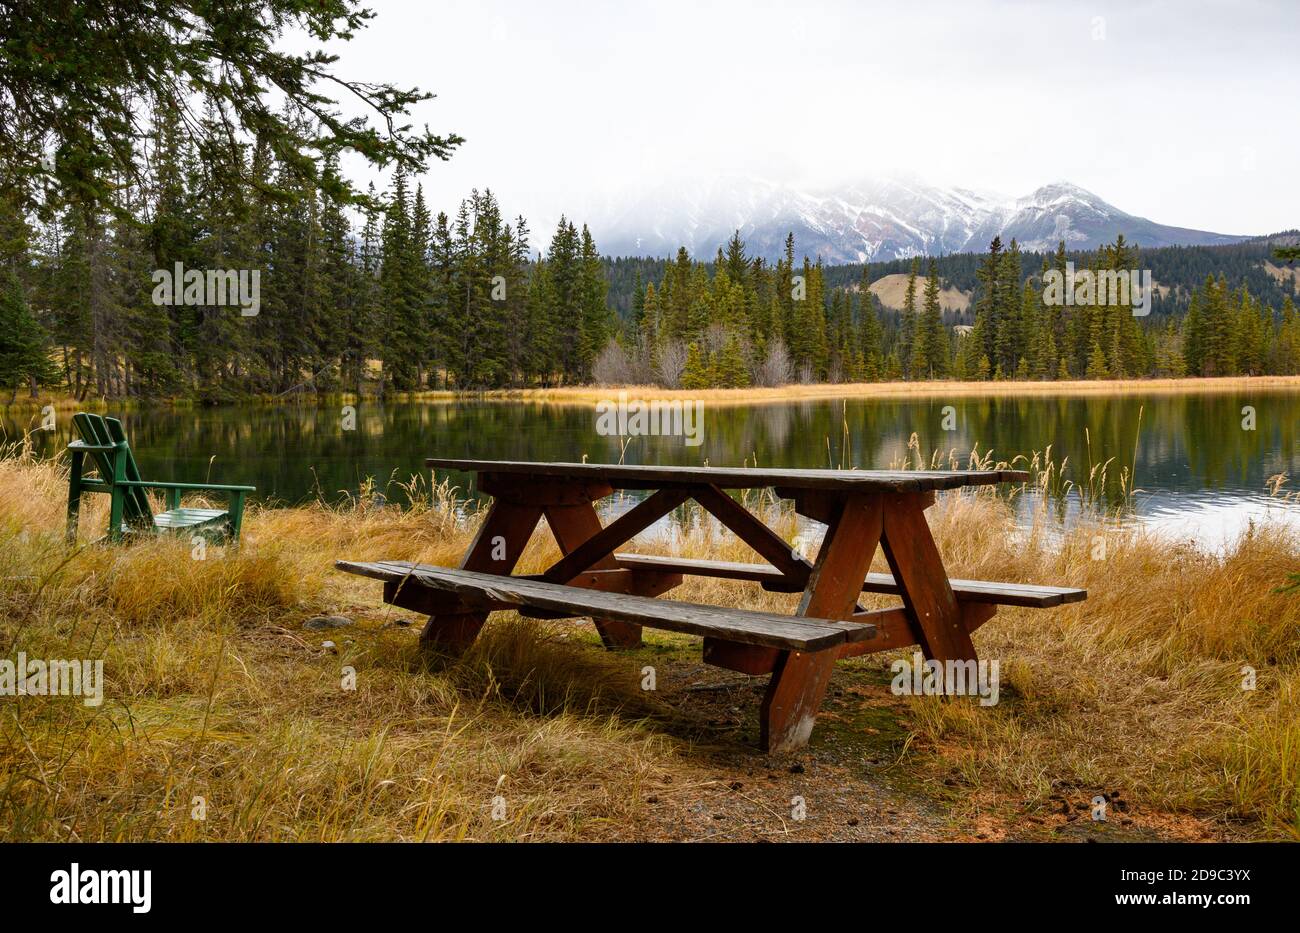 wooden picnic table and Adirondack chair near a lake in Jasper National Park Stock Photo